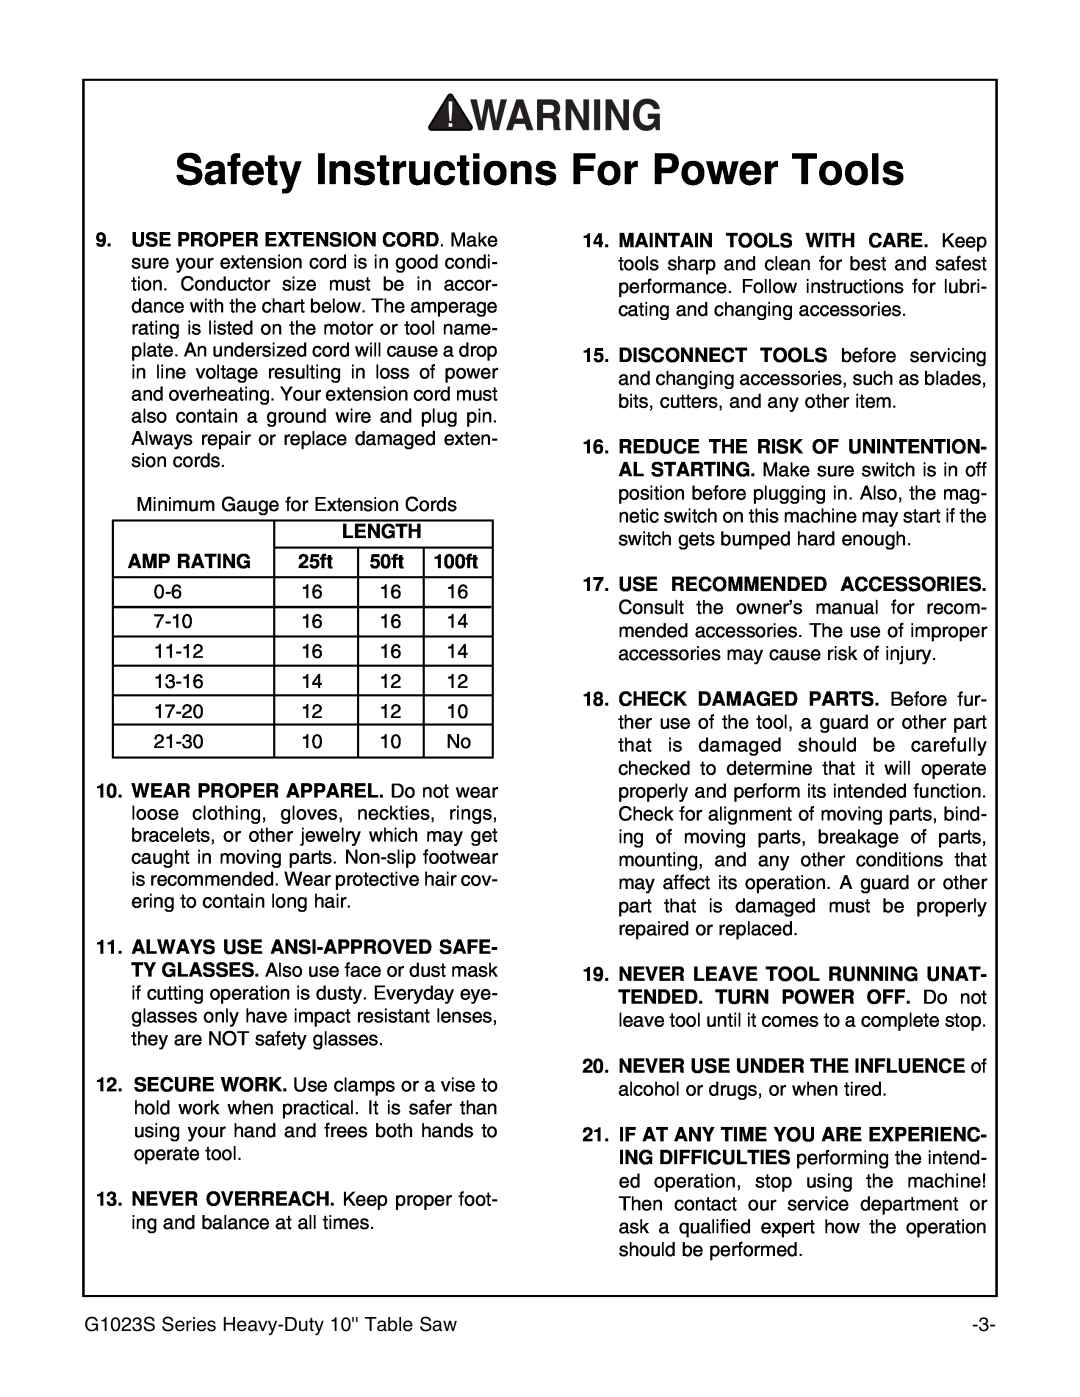 Grizzly MODEL instruction manual Safety Instructions For Power Tools, Length, Amp Rating, 25ft, 50ft, 100ft 